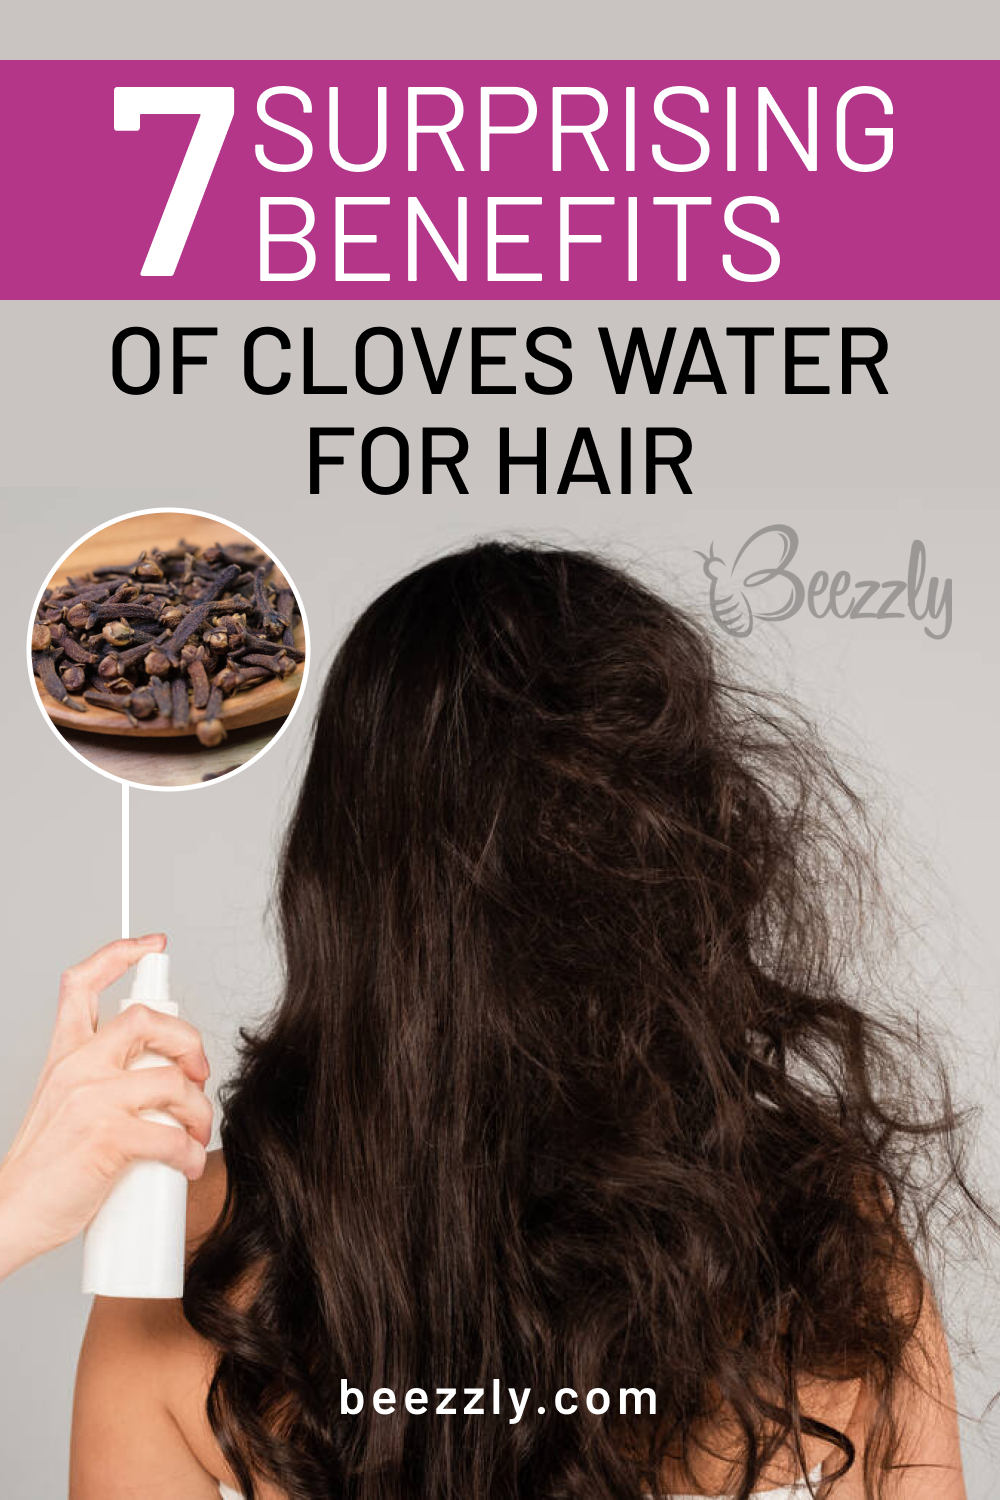 7 Surprising Benefits of Cloves Water for Hair